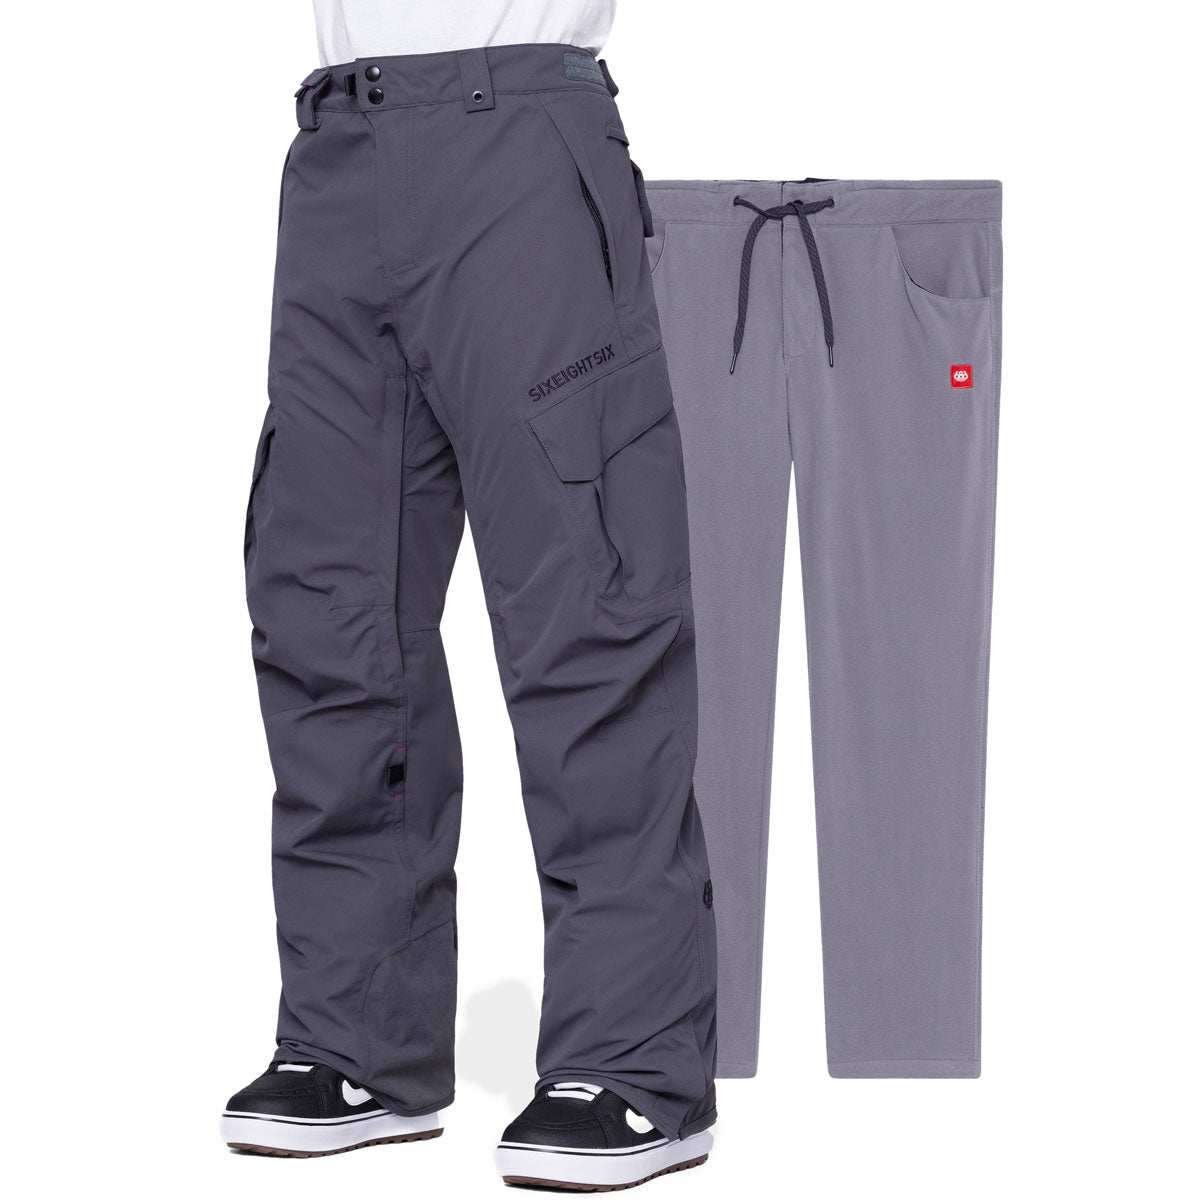 686 Men's Smarty 3-In-1 Cargo Snowboard Pants - Charcoal image 1